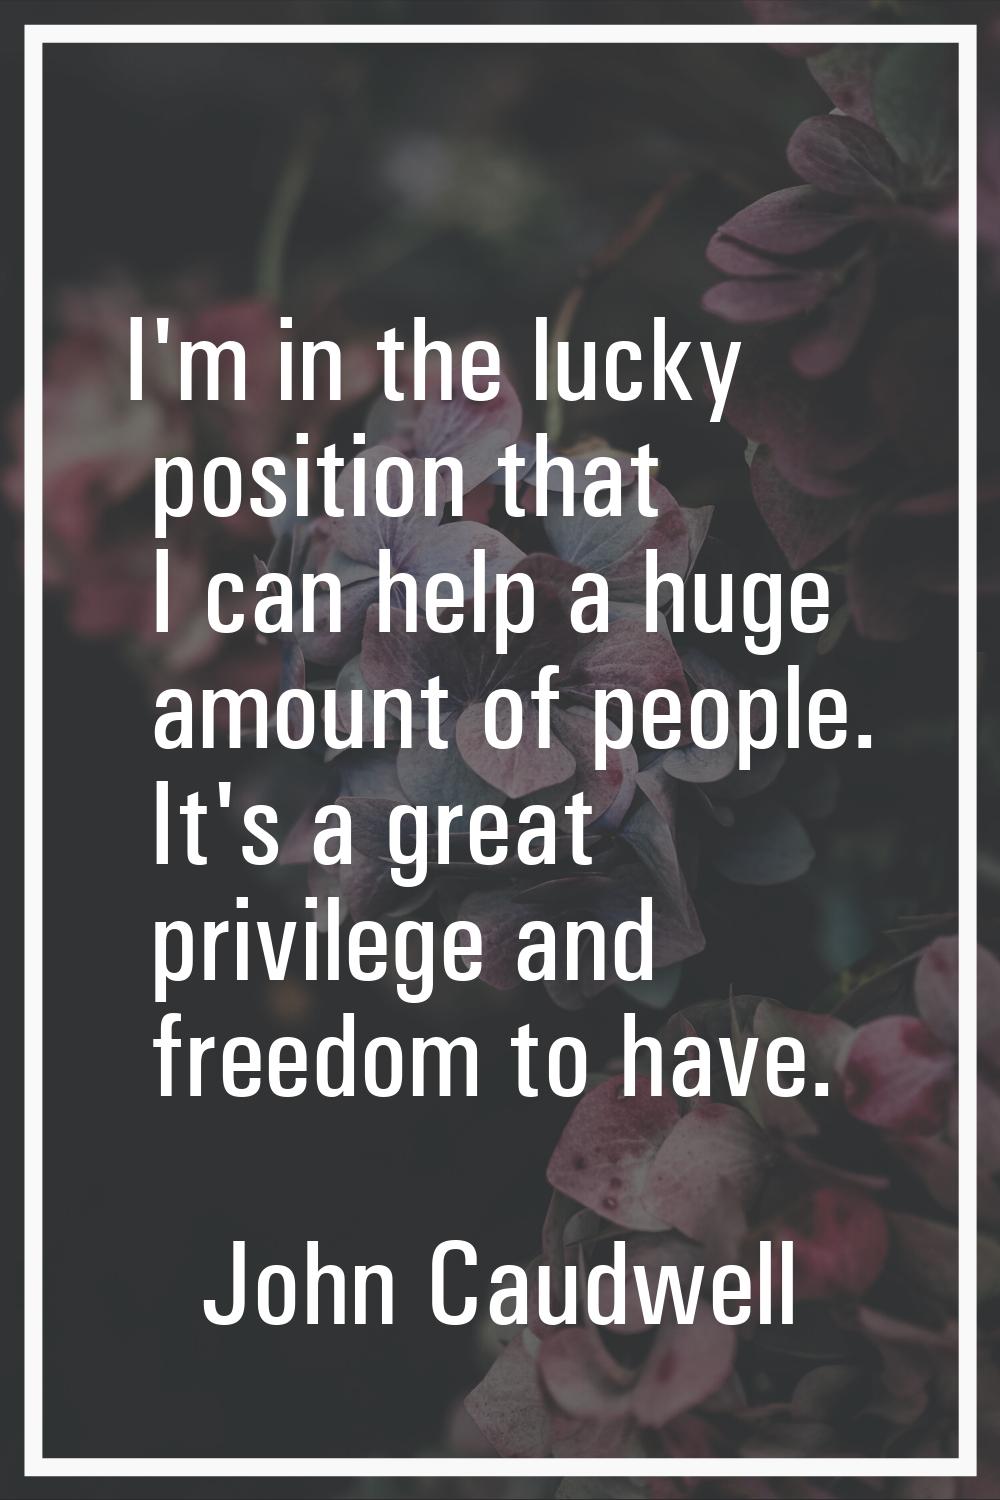 I'm in the lucky position that I can help a huge amount of people. It's a great privilege and freed